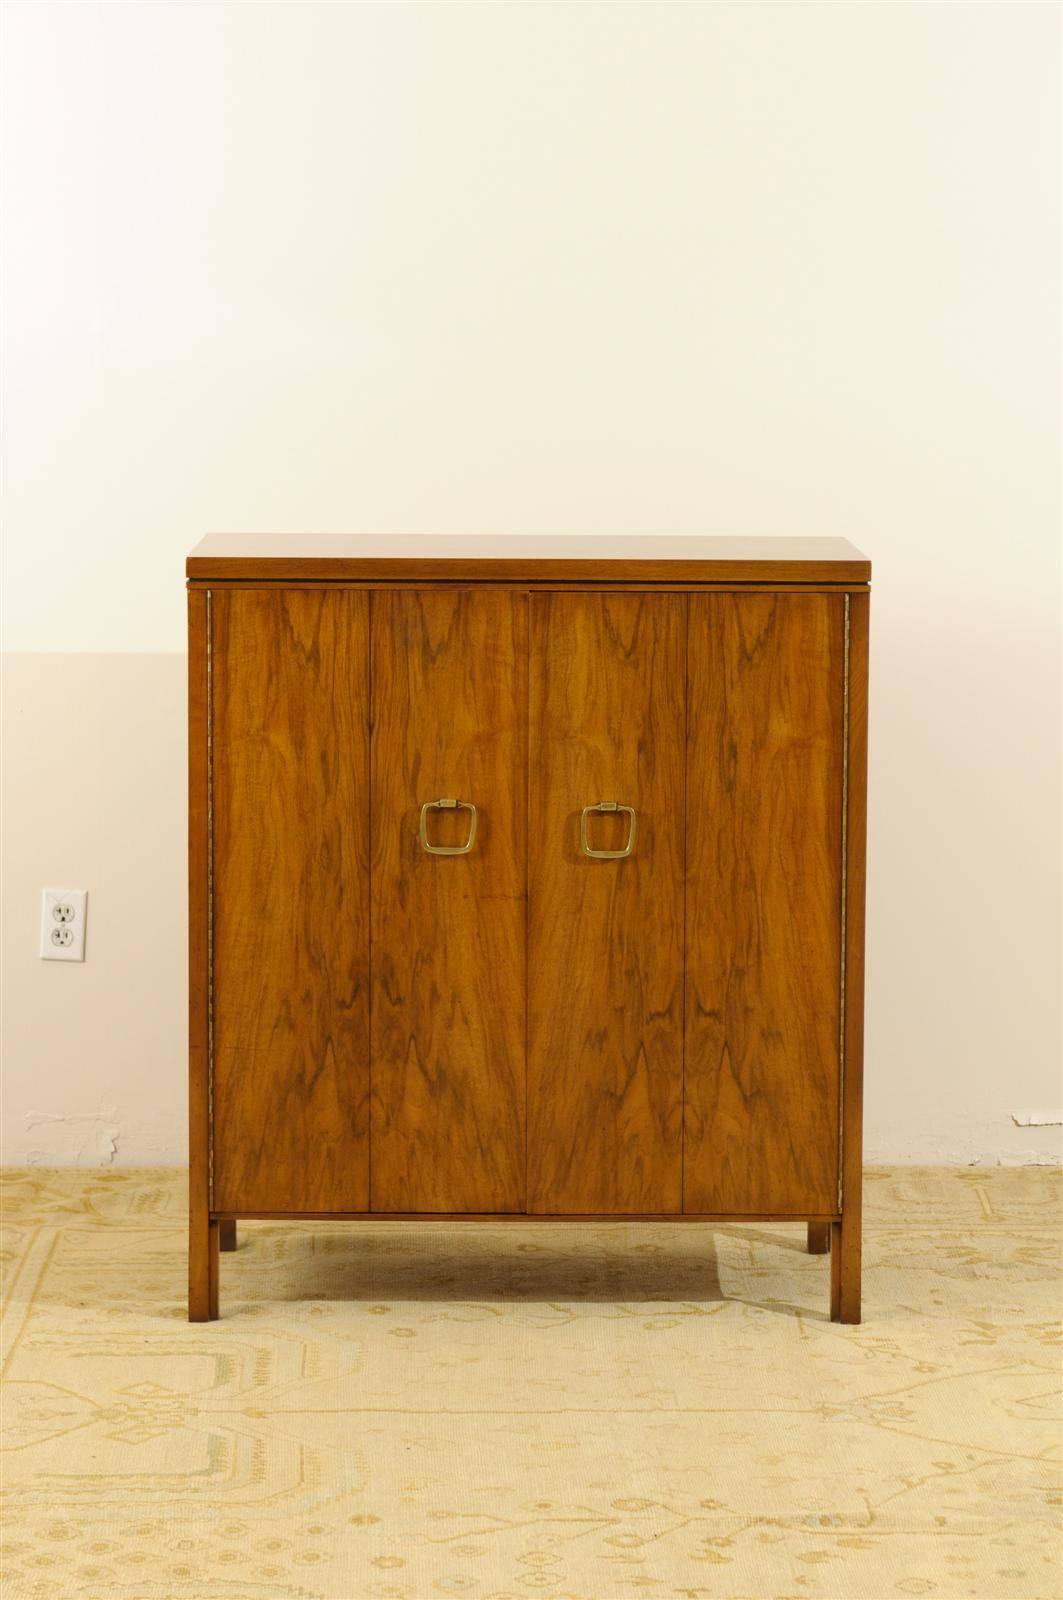 This magnificent chest is shipped as professionally photographed and described in the listing narrative: Meticulously professionally restored and completely installation ready.

A beautiful modern multipurpose cabinet by John Widdicomb, circa 1960.